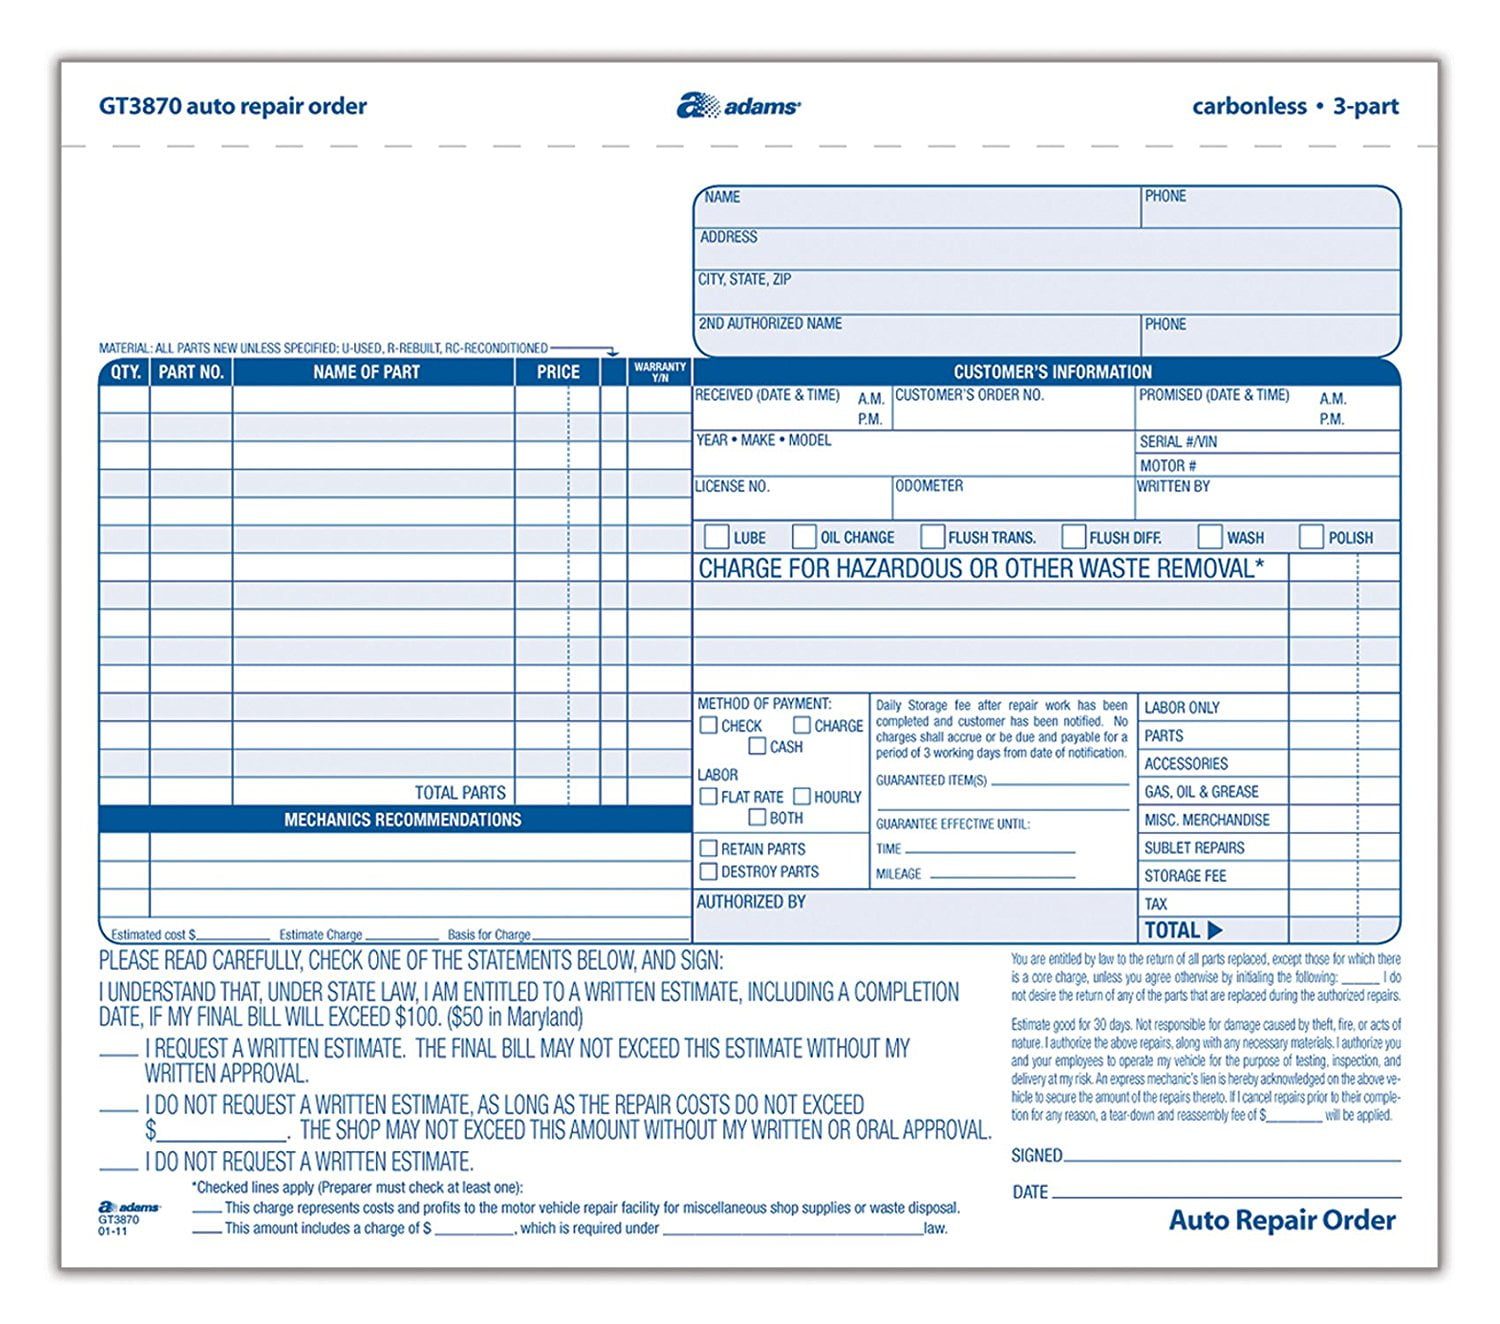 auto-repair-order-forms-8-5-x-7-44-inch-3-part-carbonless-50-pack